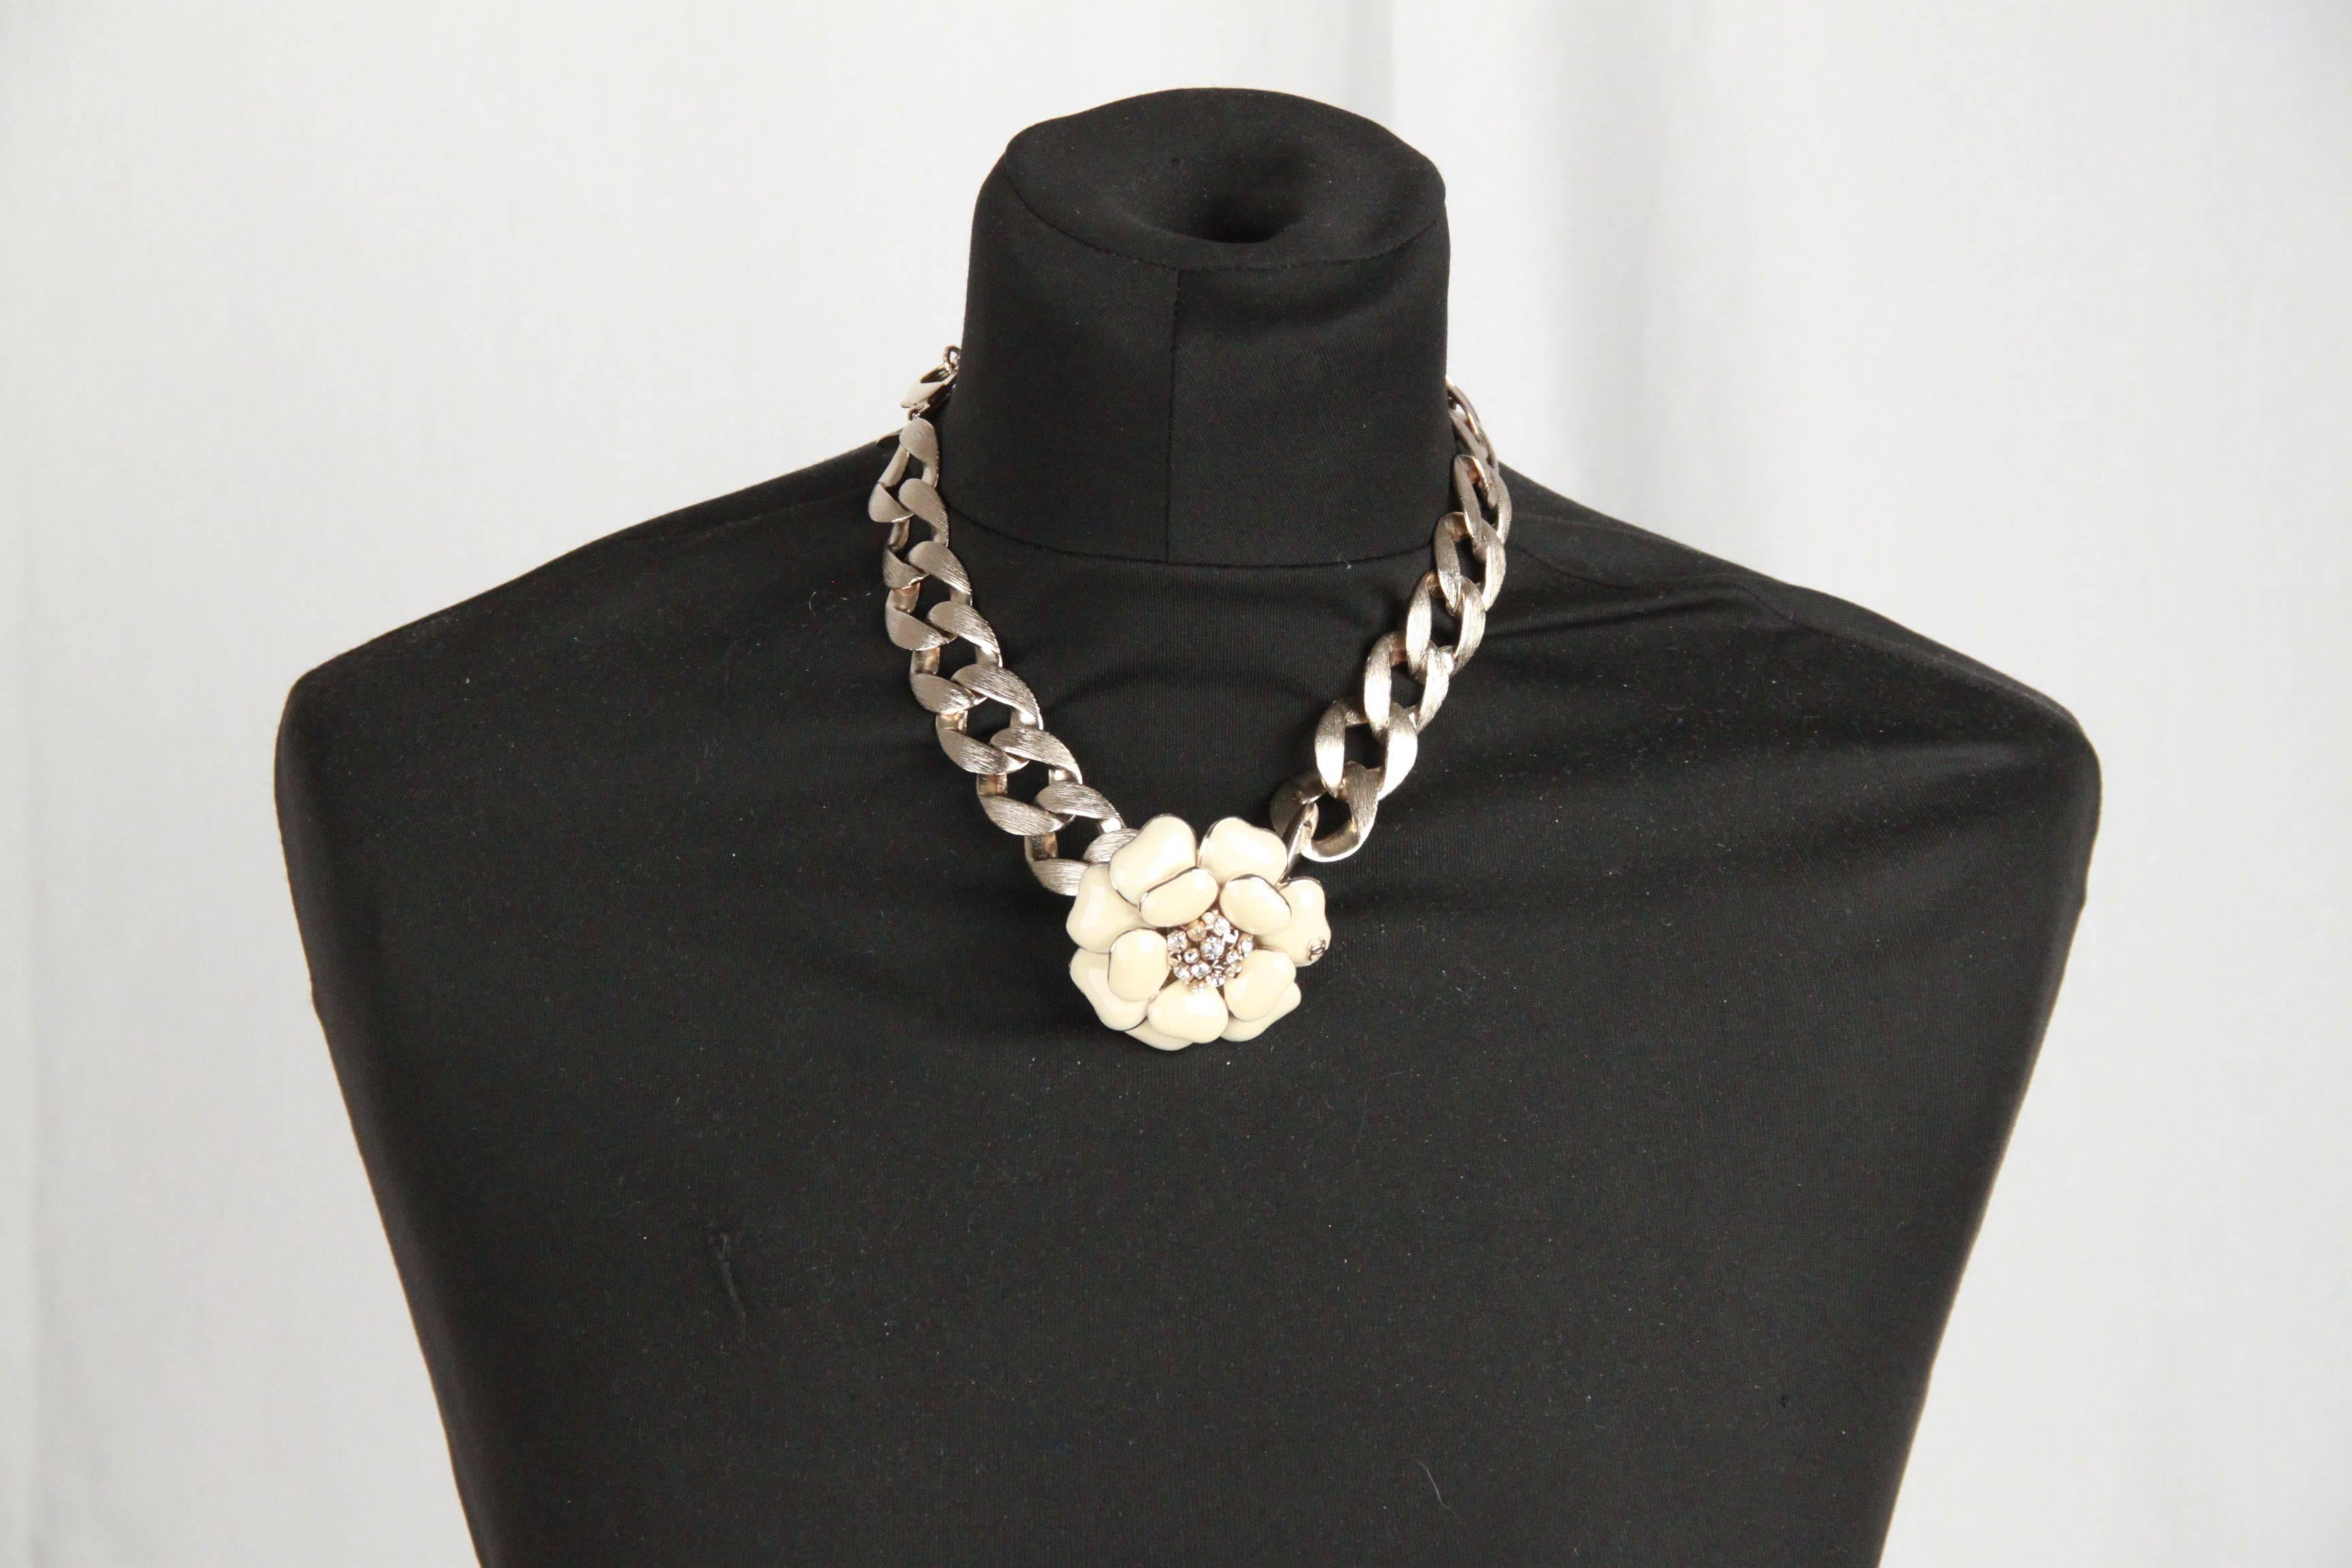 - Chanel Gold metal chunky chain necklace 
- Brushed light gold metal
- Enameled ivory camellia flower embellished with rhinestones and small CC logos in the center
- Lobster closure
- Total lenght: 17 inches - 43,2 cm

Logos & tag: gold metal